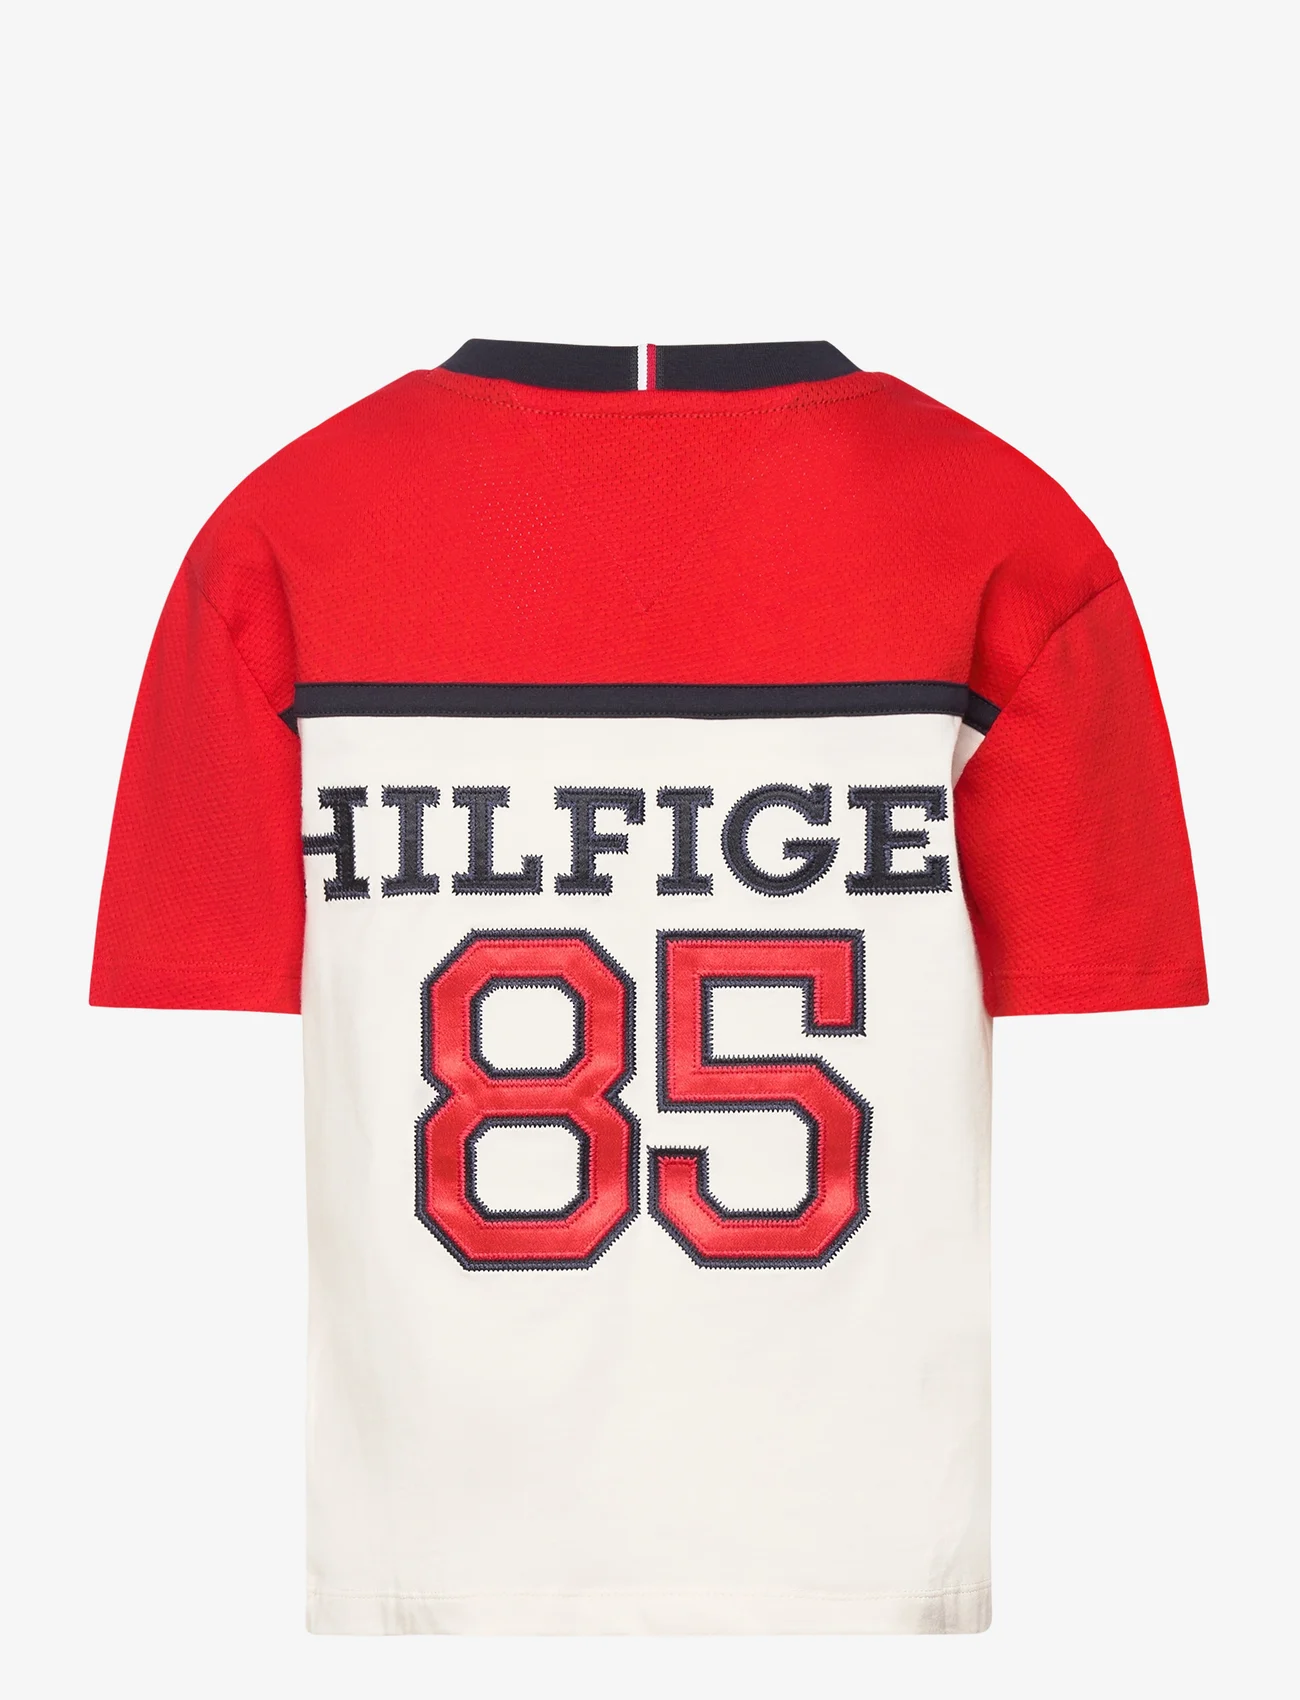 Tommy Hilfiger - VARSITY TEE S/S - lyhythihaiset t-paidat - red/white colorblock - 1